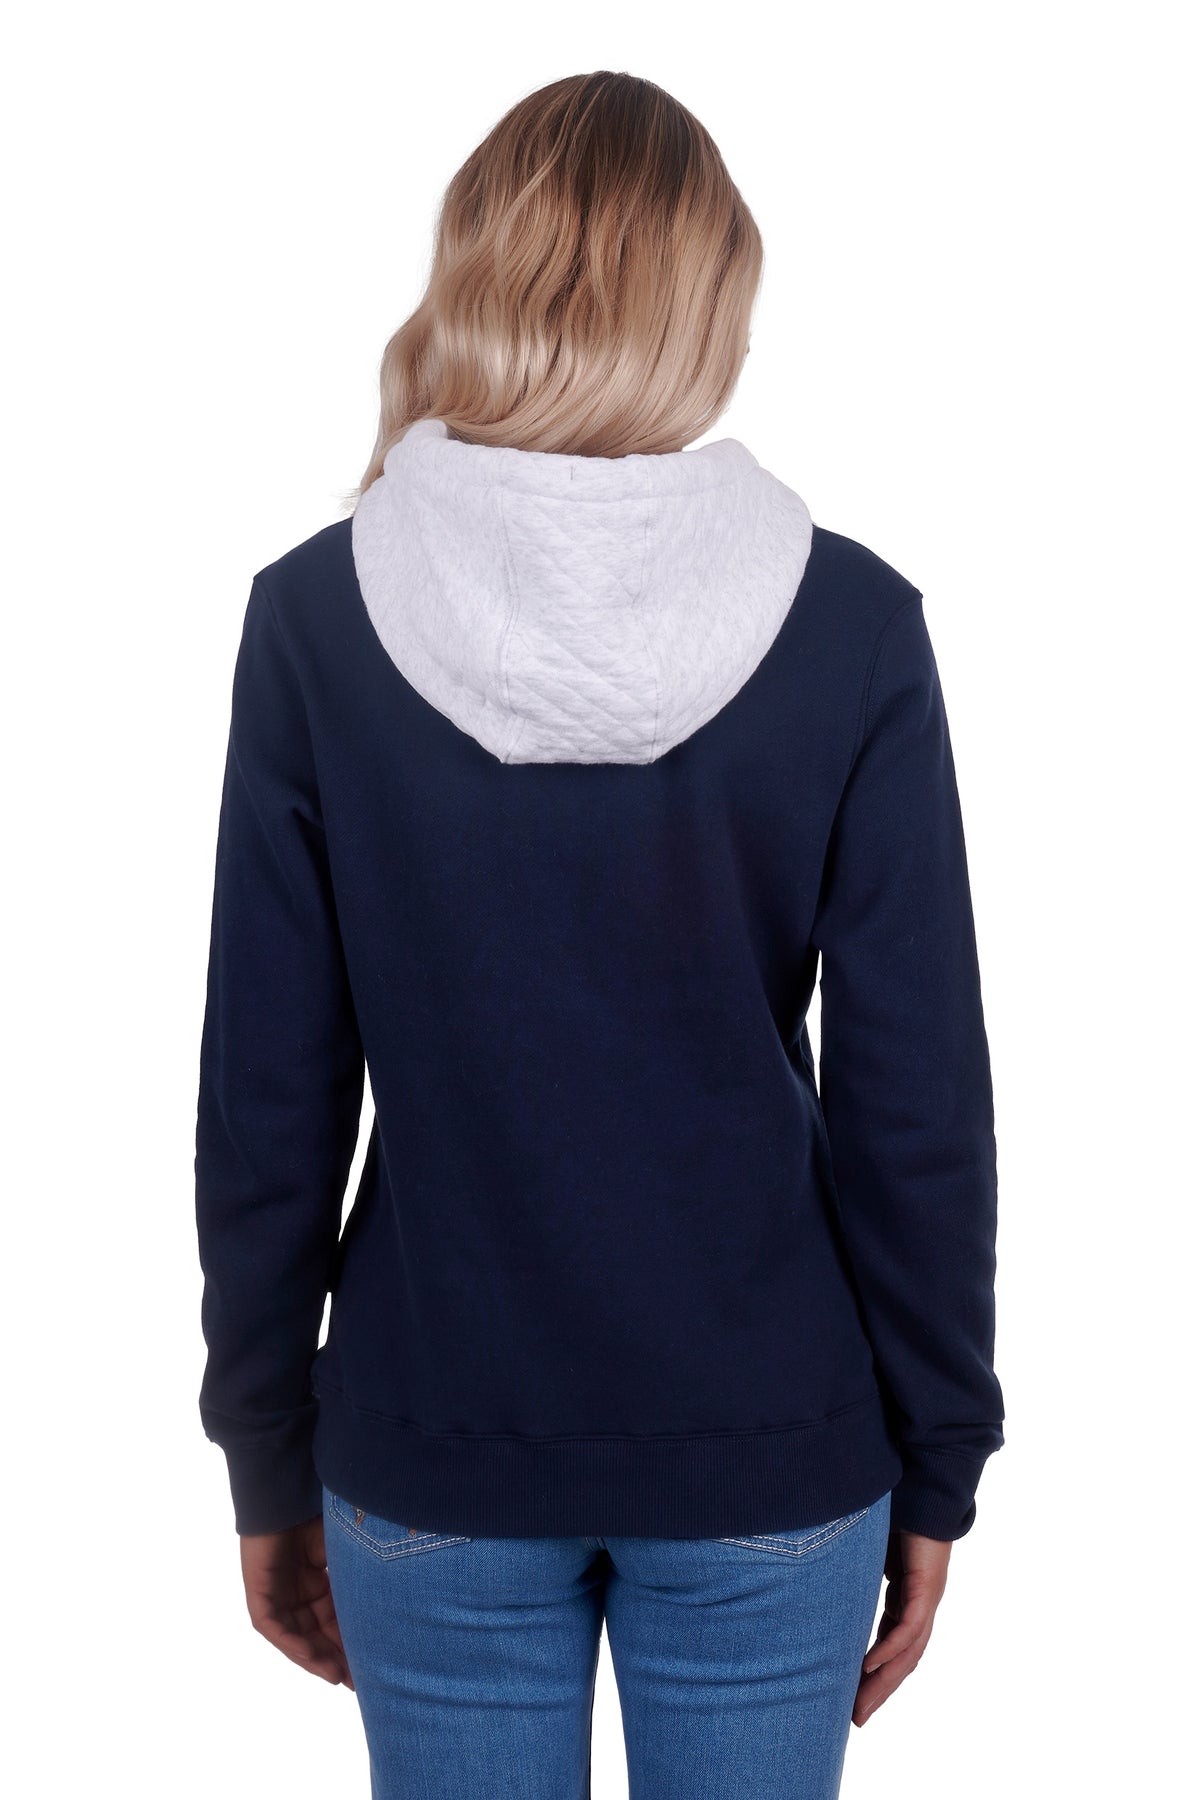 Wrangler Womens Salley Pullover Hoodie - Navy/White Marle